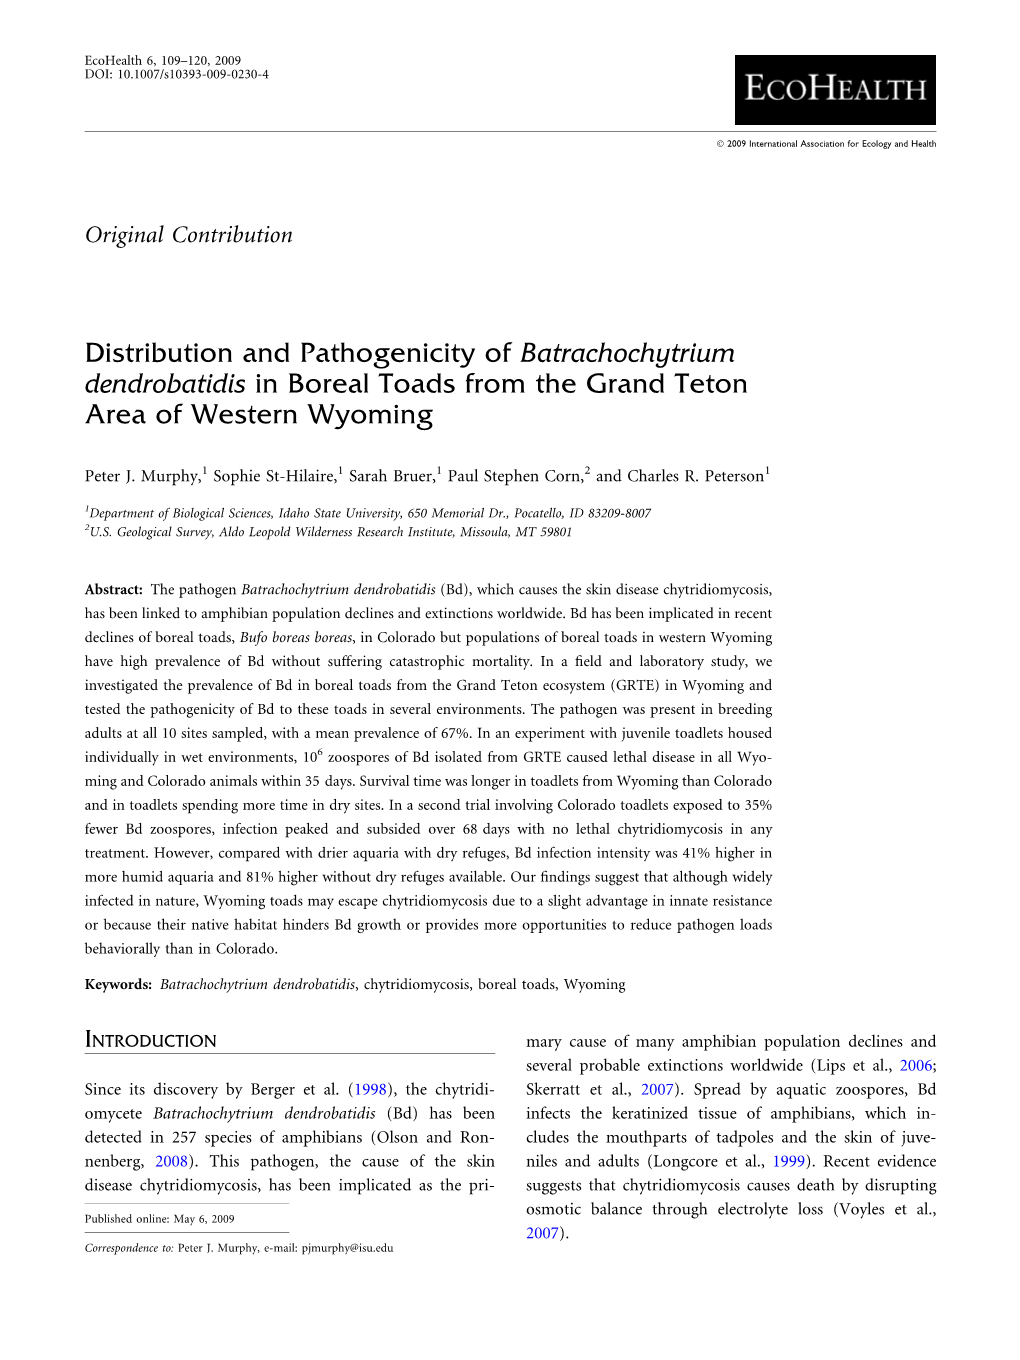 Batrachochytrium Dendrobatidis in Boreal Toads from the Grand Teton Area of Western Wyoming